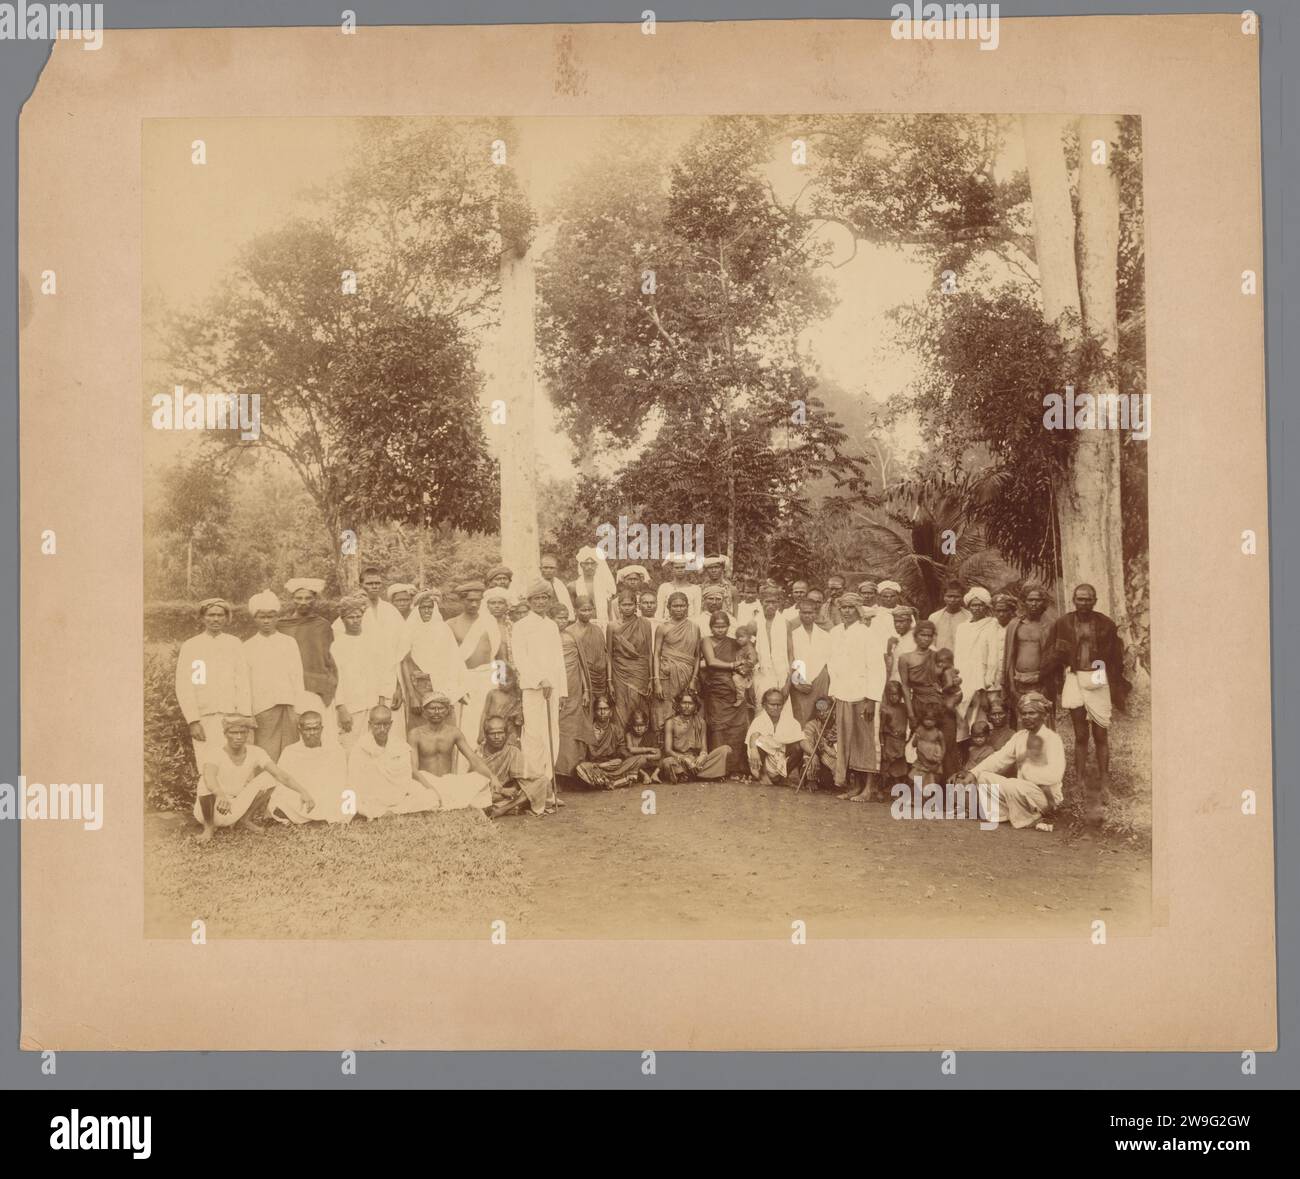 Group portrait of Indian contract workers on a tobacco plantation, Dutch East Indies, 1891 - 1894 photograph  Dutch East Indies, The paper. cardboard albumen print working class, labourers. plantation. anonymous historical persons portrayed in a group, in a group-portrait Sumatra Stock Photo